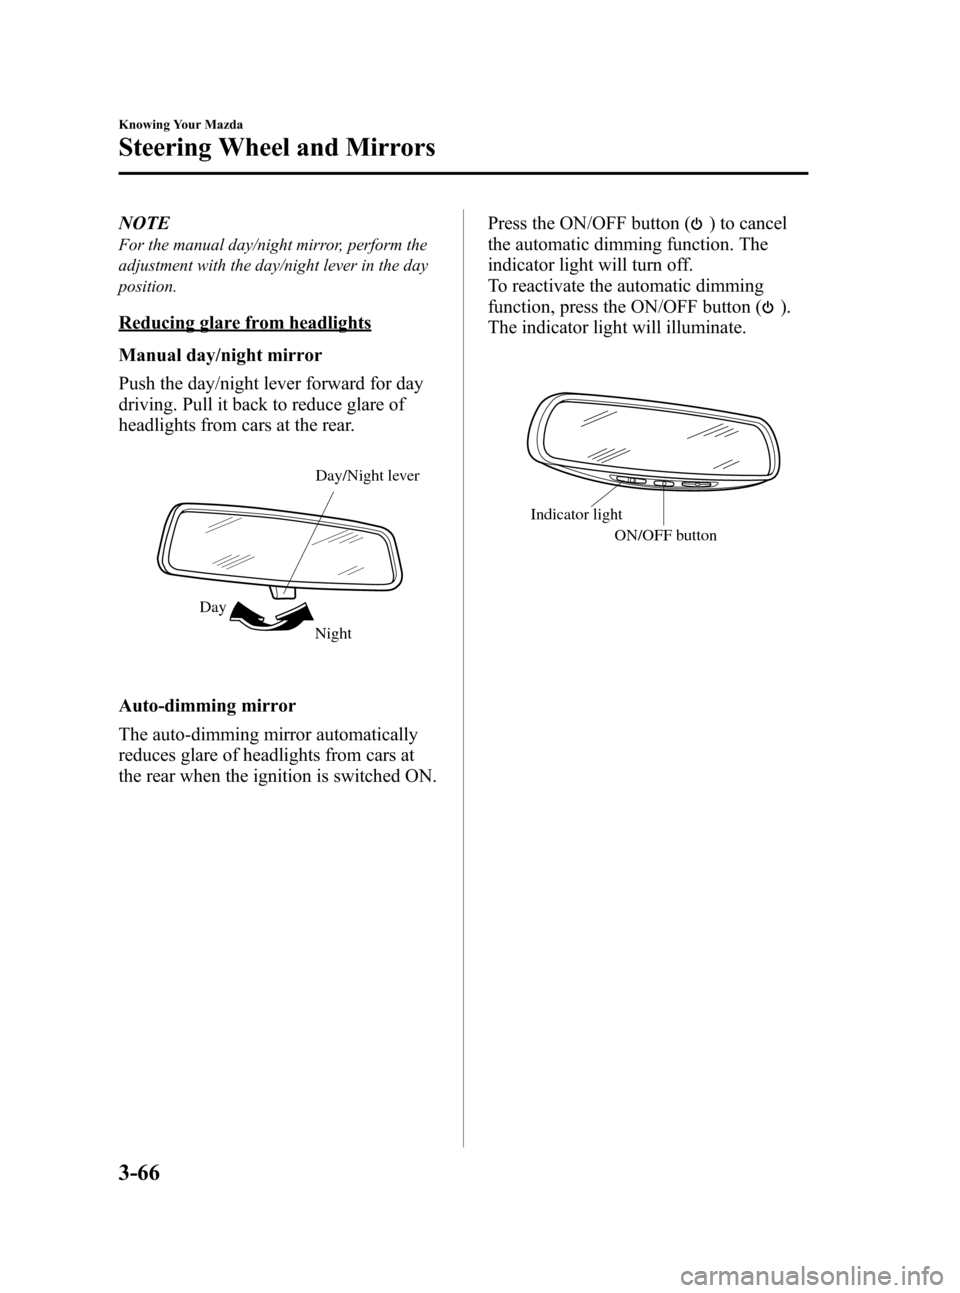 MAZDA MODEL 3 HATCHBACK 2011  Owners Manual (in English) Black plate (142,1)
NOTE
For the manual day/night mirror, perform the
adjustment with the day/night lever in the day
position.
Reducing glare from headlights
Manual day/night mirror
Push the day/night